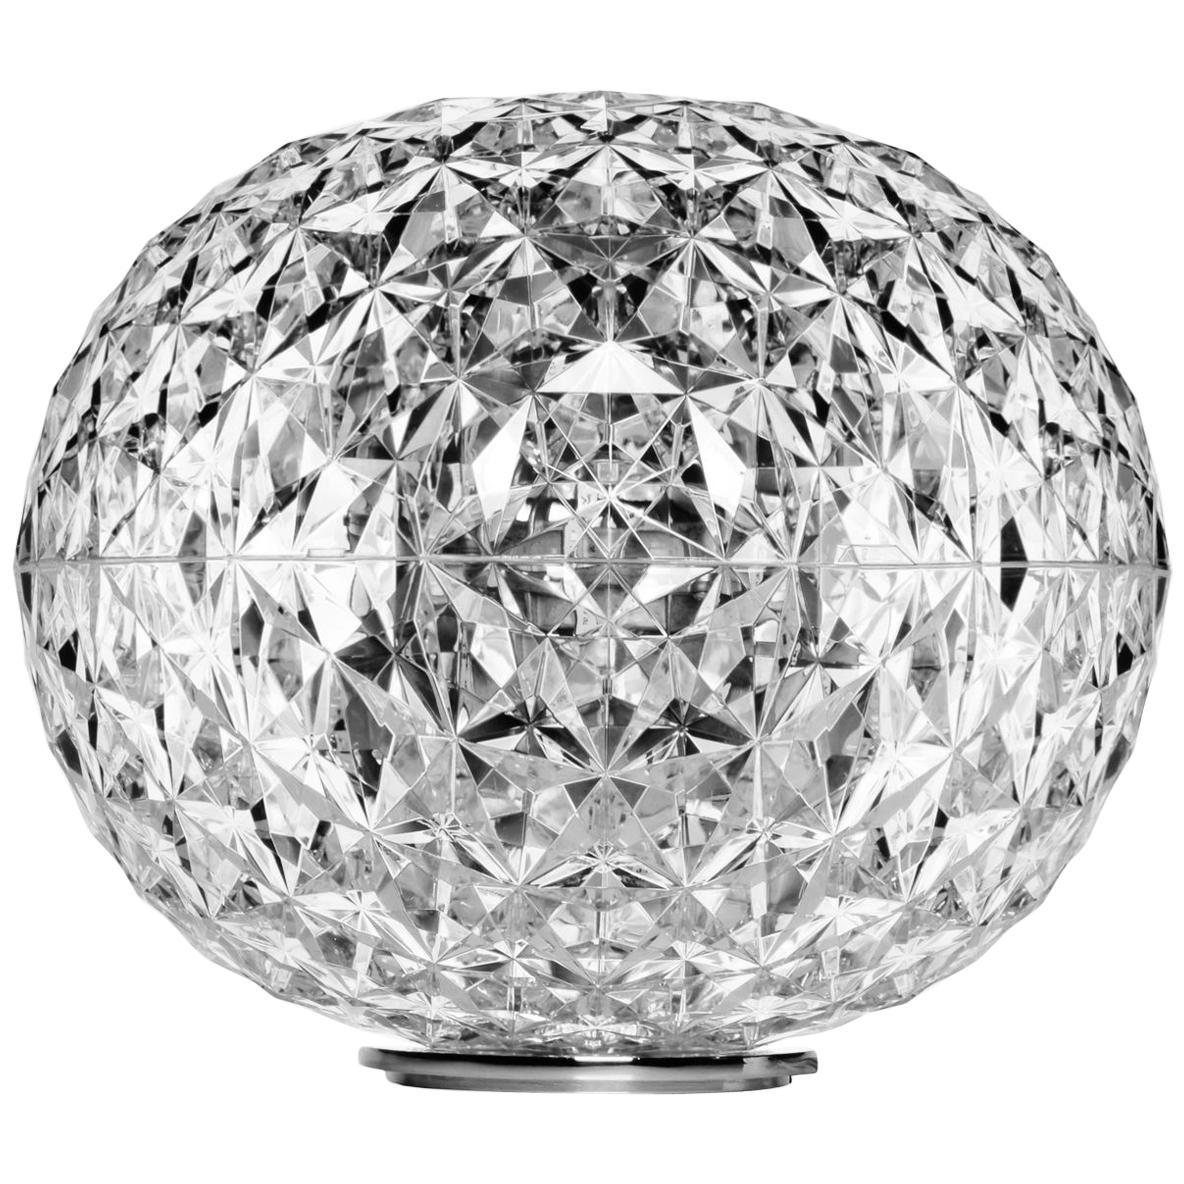 Kartell Small Planet Table Lamp in Crystal by Tokujin Yoshioka